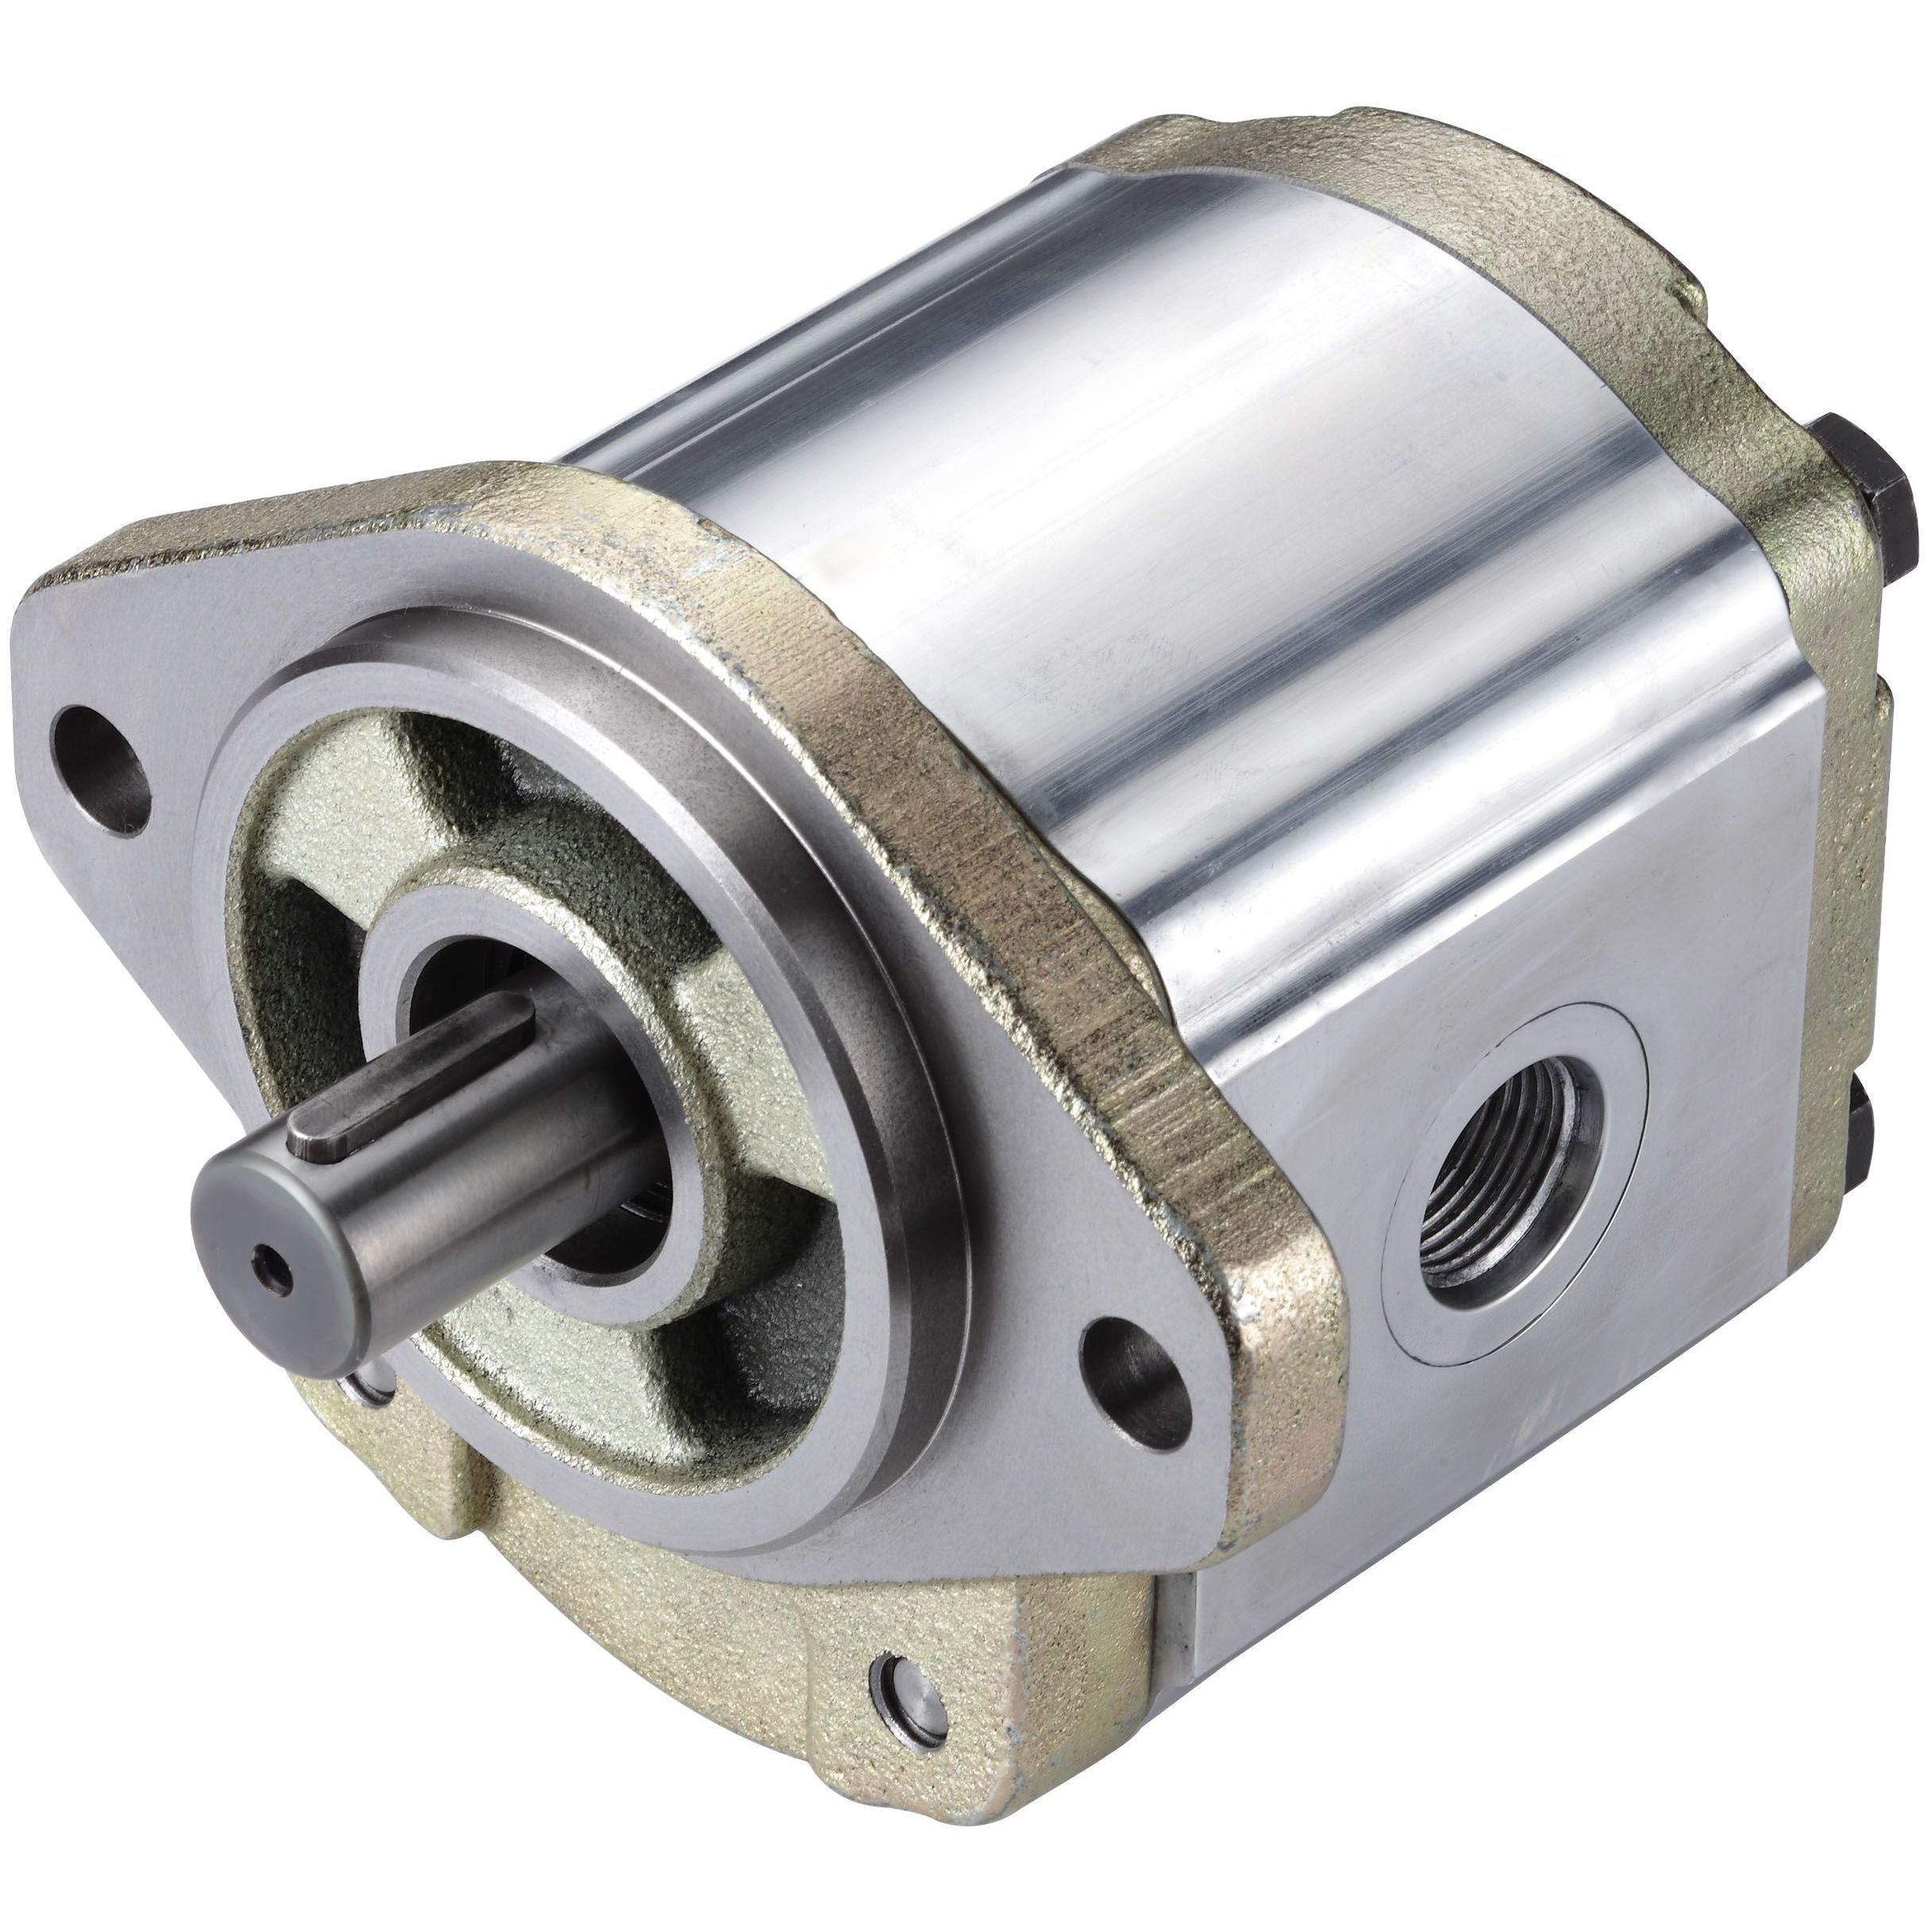 3GA5U125L : Honor Gear Pump, CCW Rotation, 25cc (1.53in3), 11.89 GPM, 3500psi, 3000 RPM, #16 SAE (1") In, #12 SAE (3/4") Out, Splined Shaft 11-Tooth, 16/32 Pitch, SAE A 2-Bolt Mount